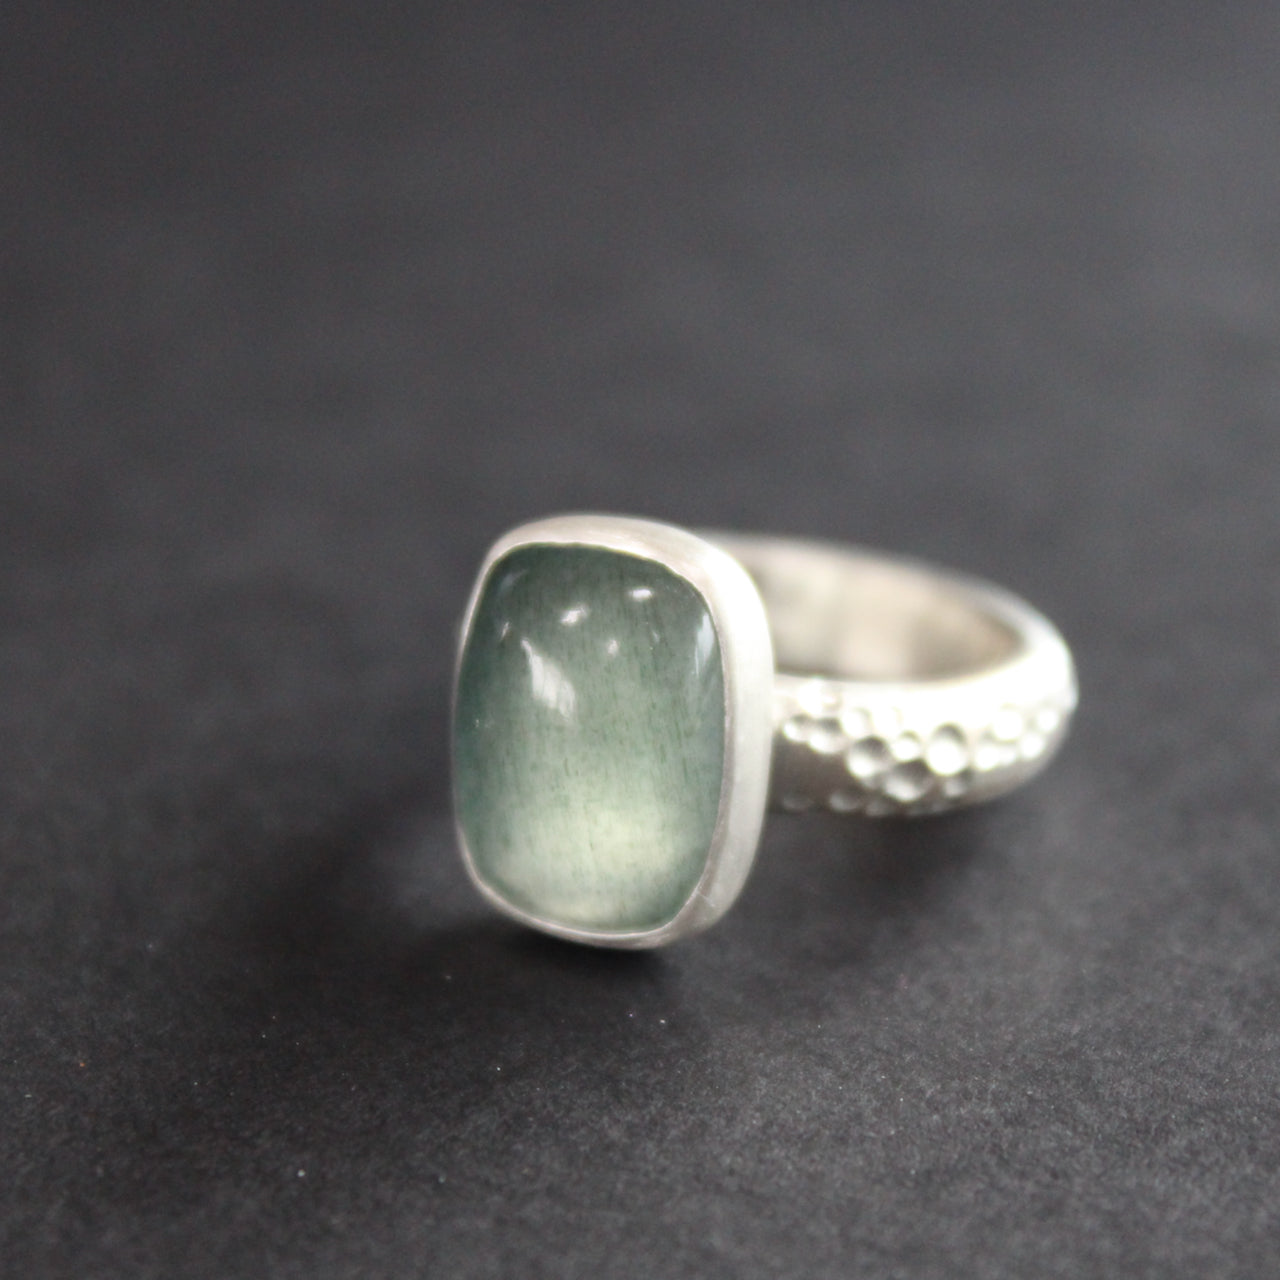 Moss aquamine textured ring in brushed silver by Carin Lindberg